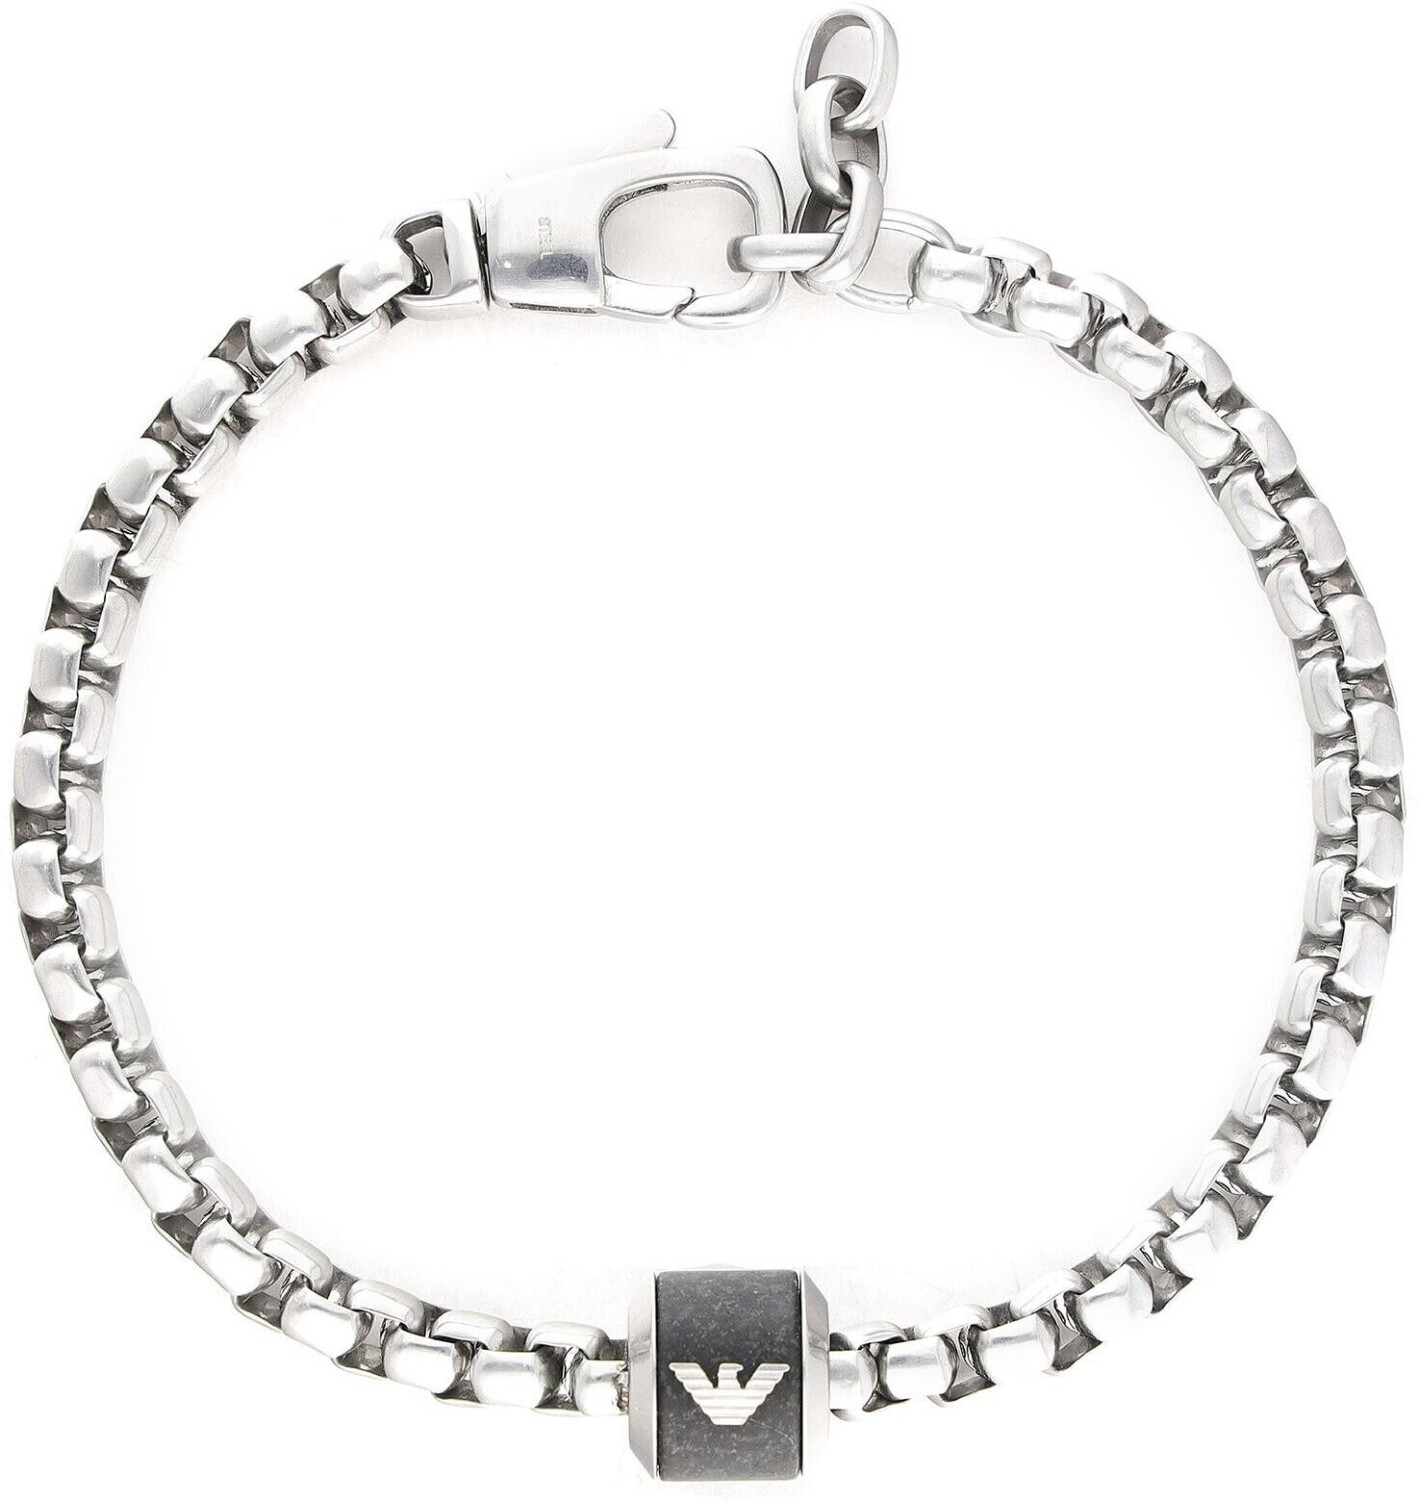 Bracelet Deals Armani – Best £77.76 on (EGS2911040) from Emporio Buy (Today)